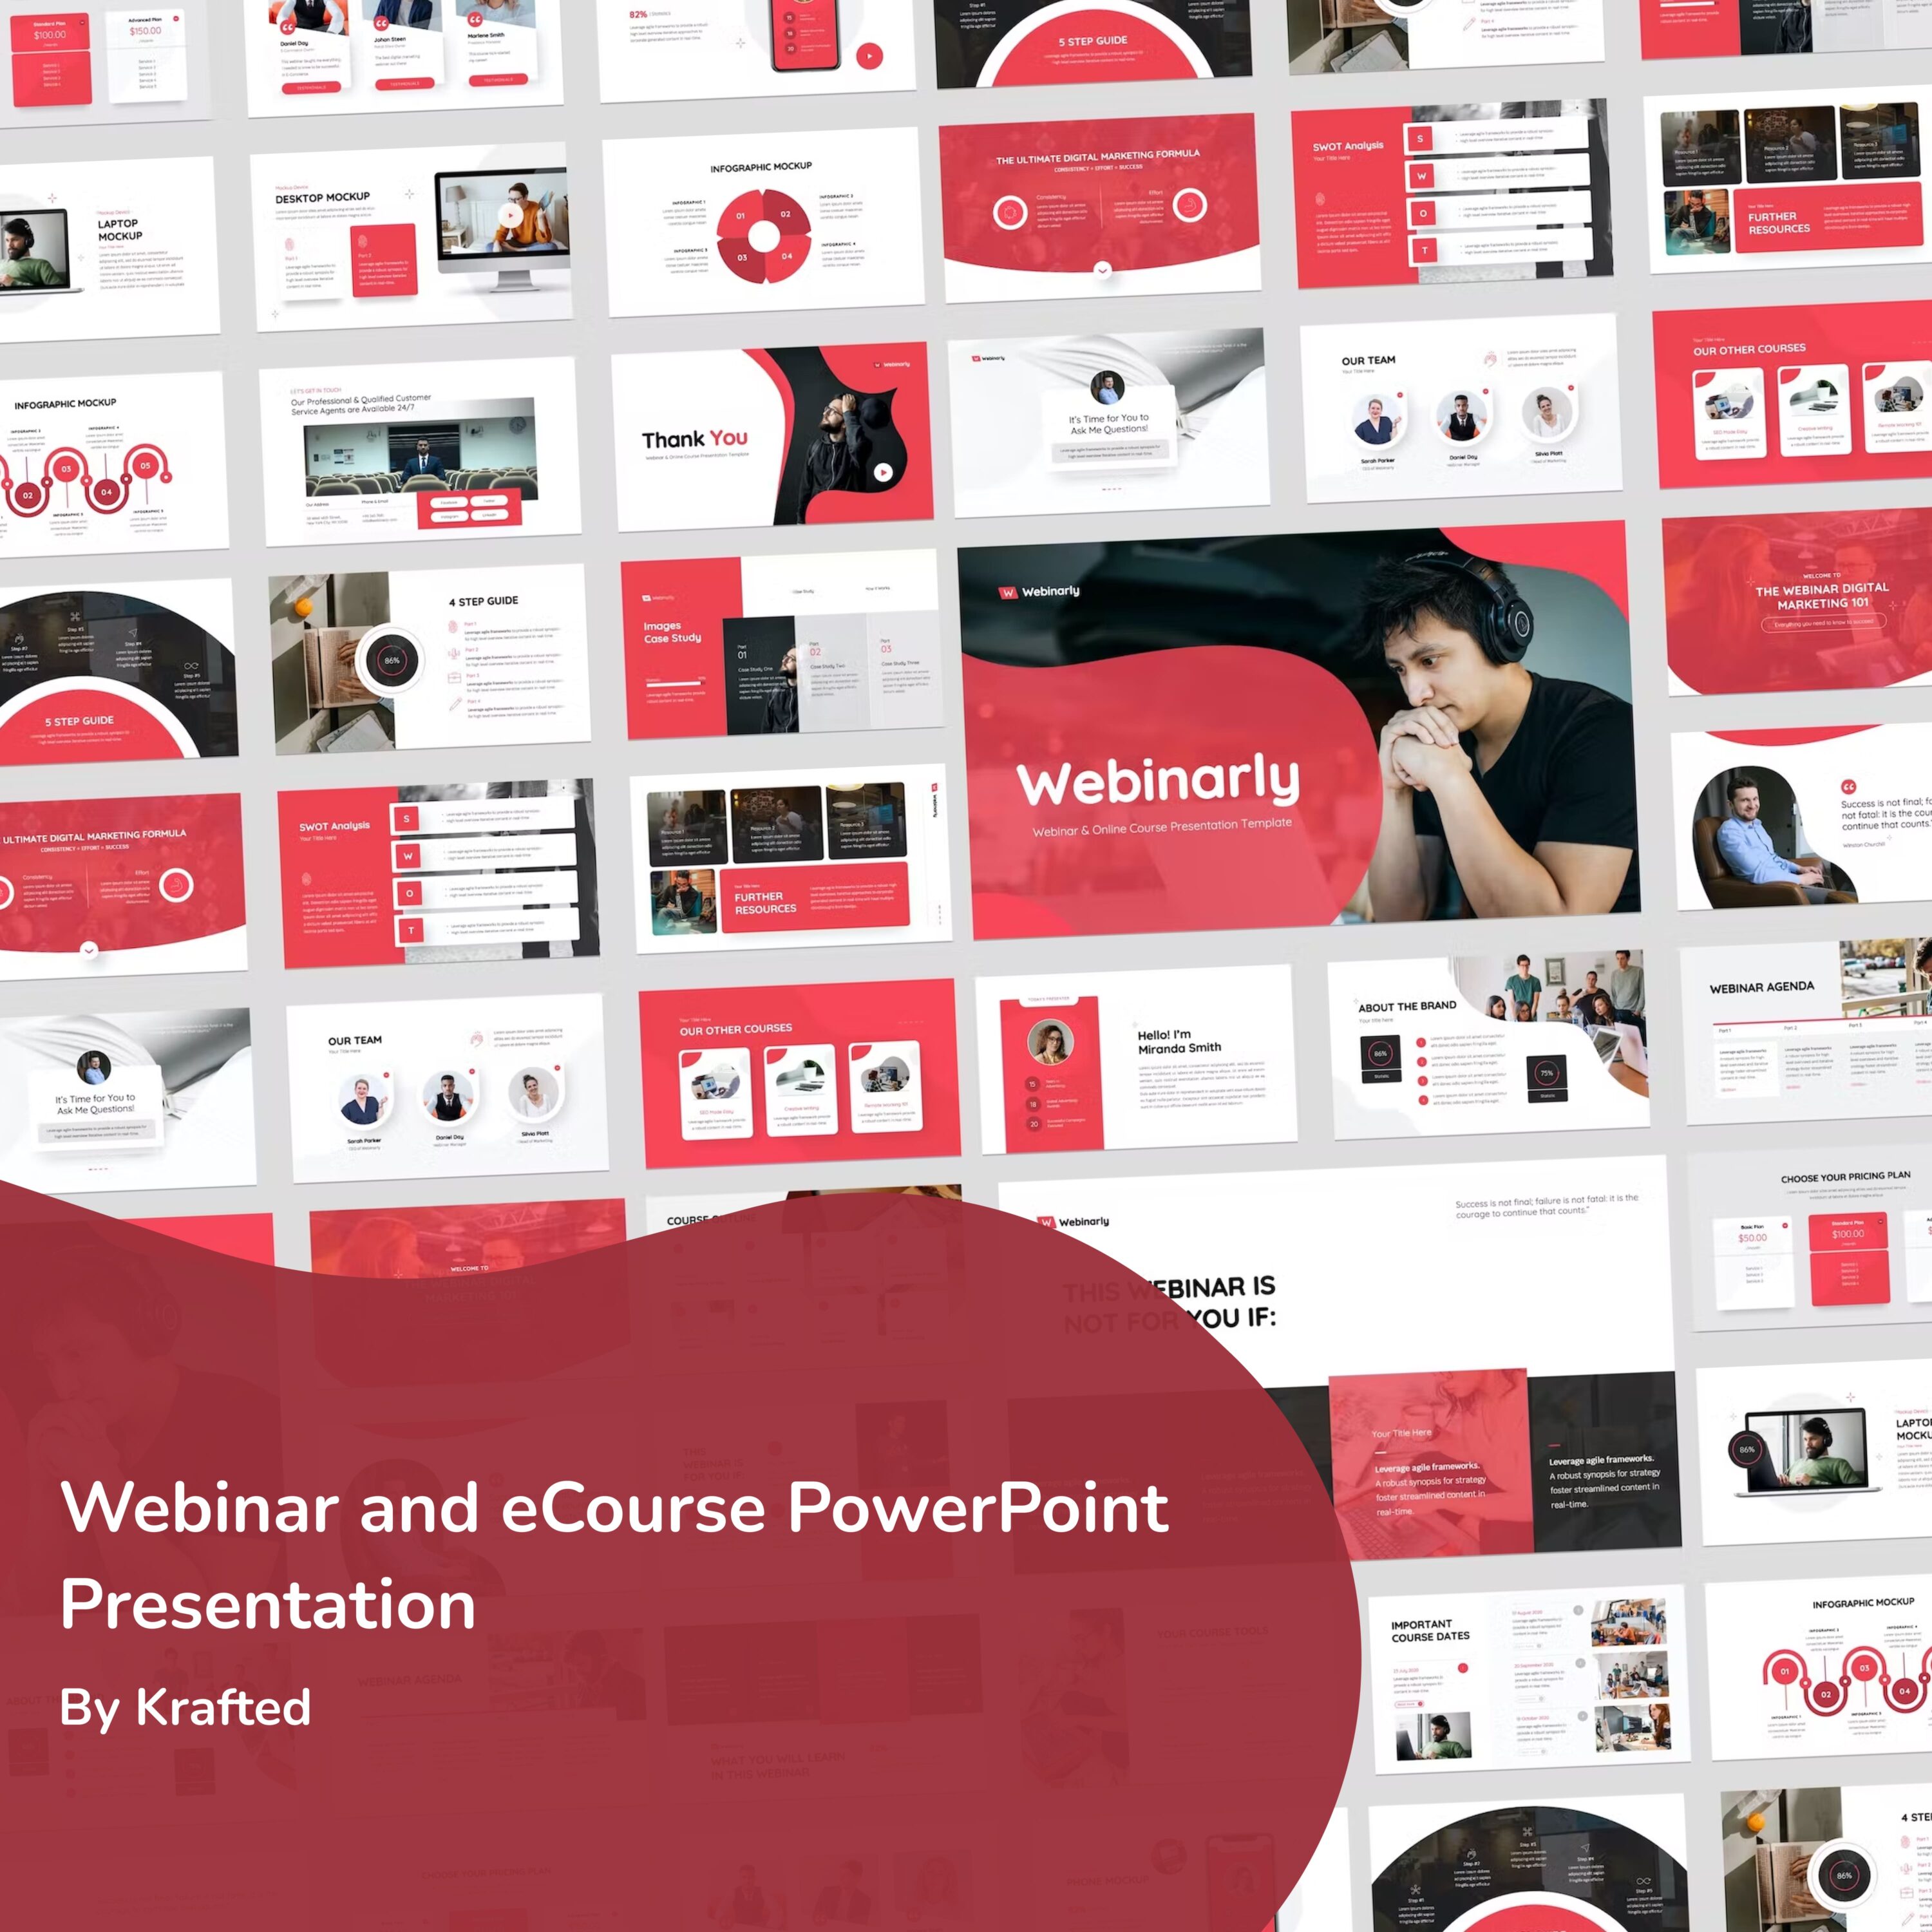 Webinar and eCourse PowerPoint Presentation - main image preview.